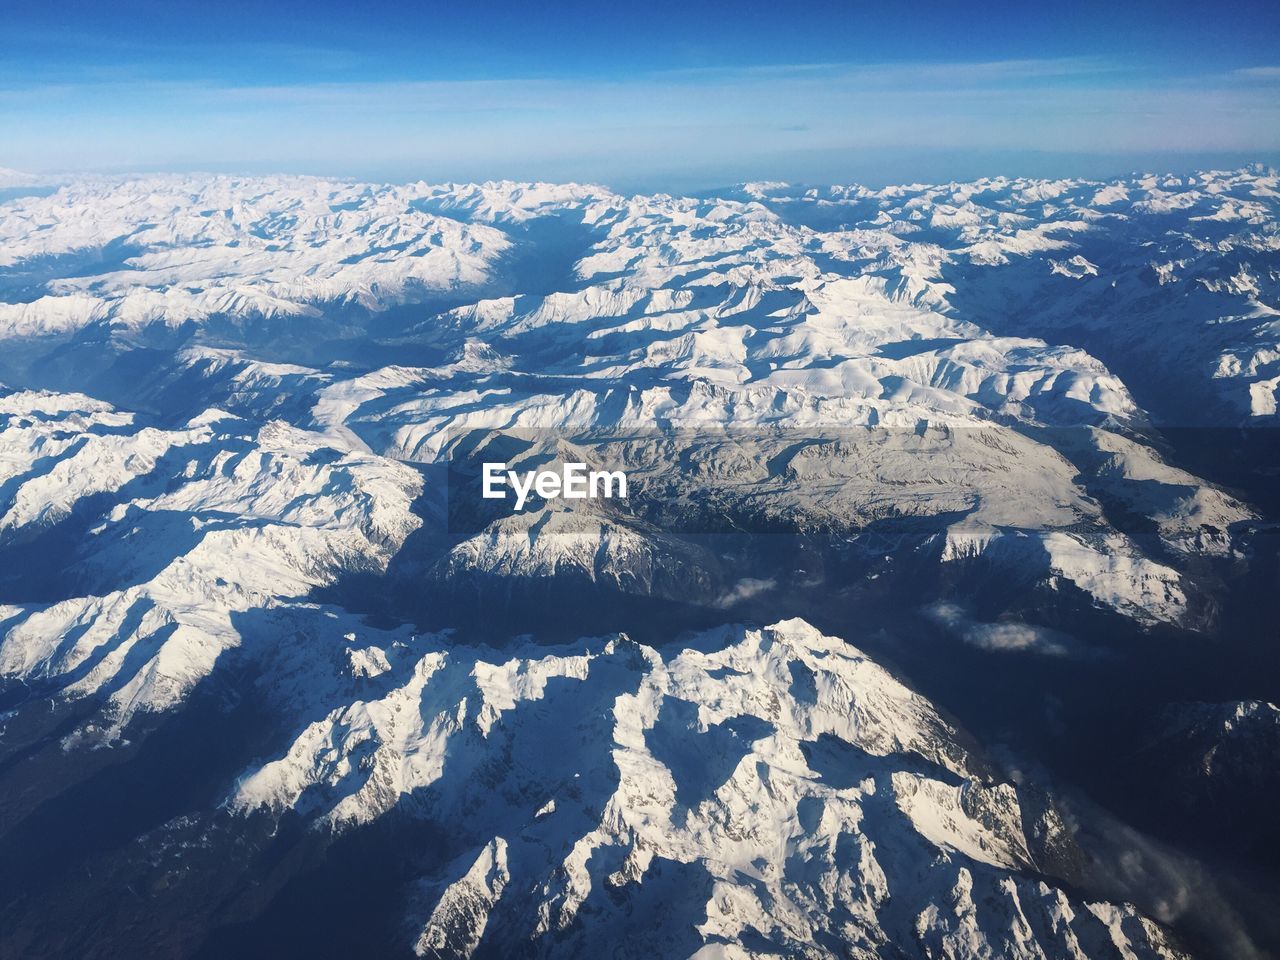 Snowy mountains from a high altitude